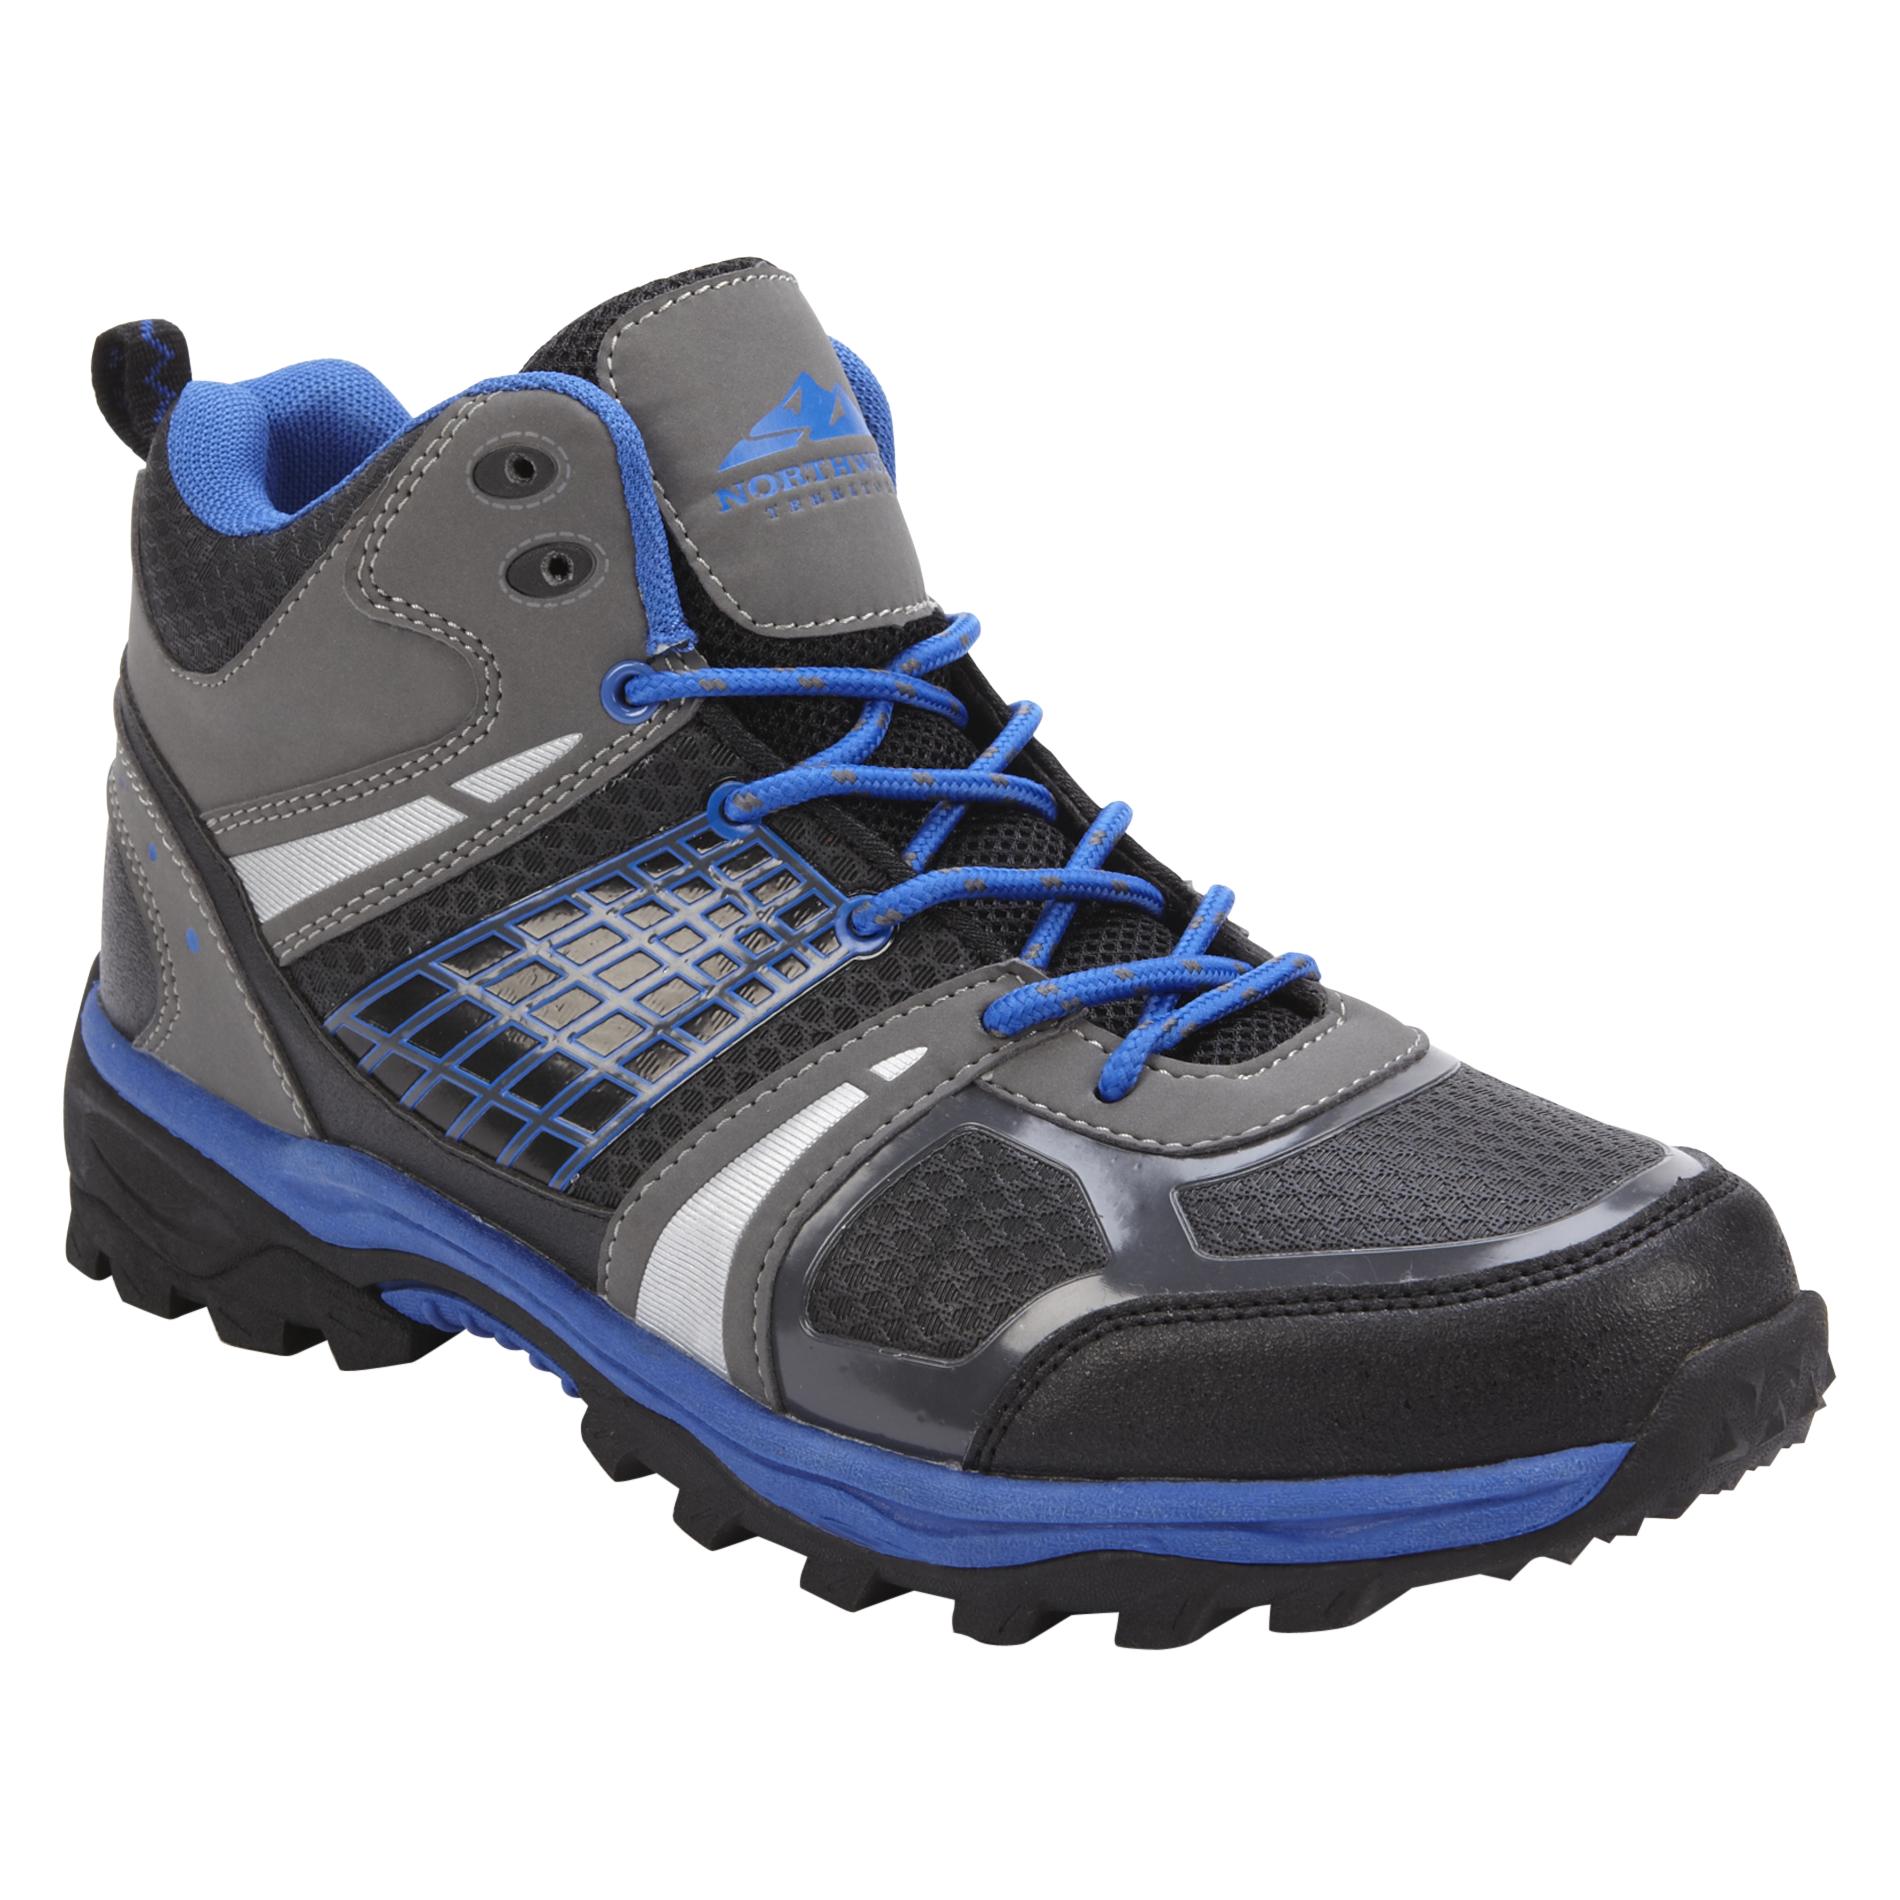 Northwest Territory Men's Mid Hiker Boot Trailhawker - Grey/Blue